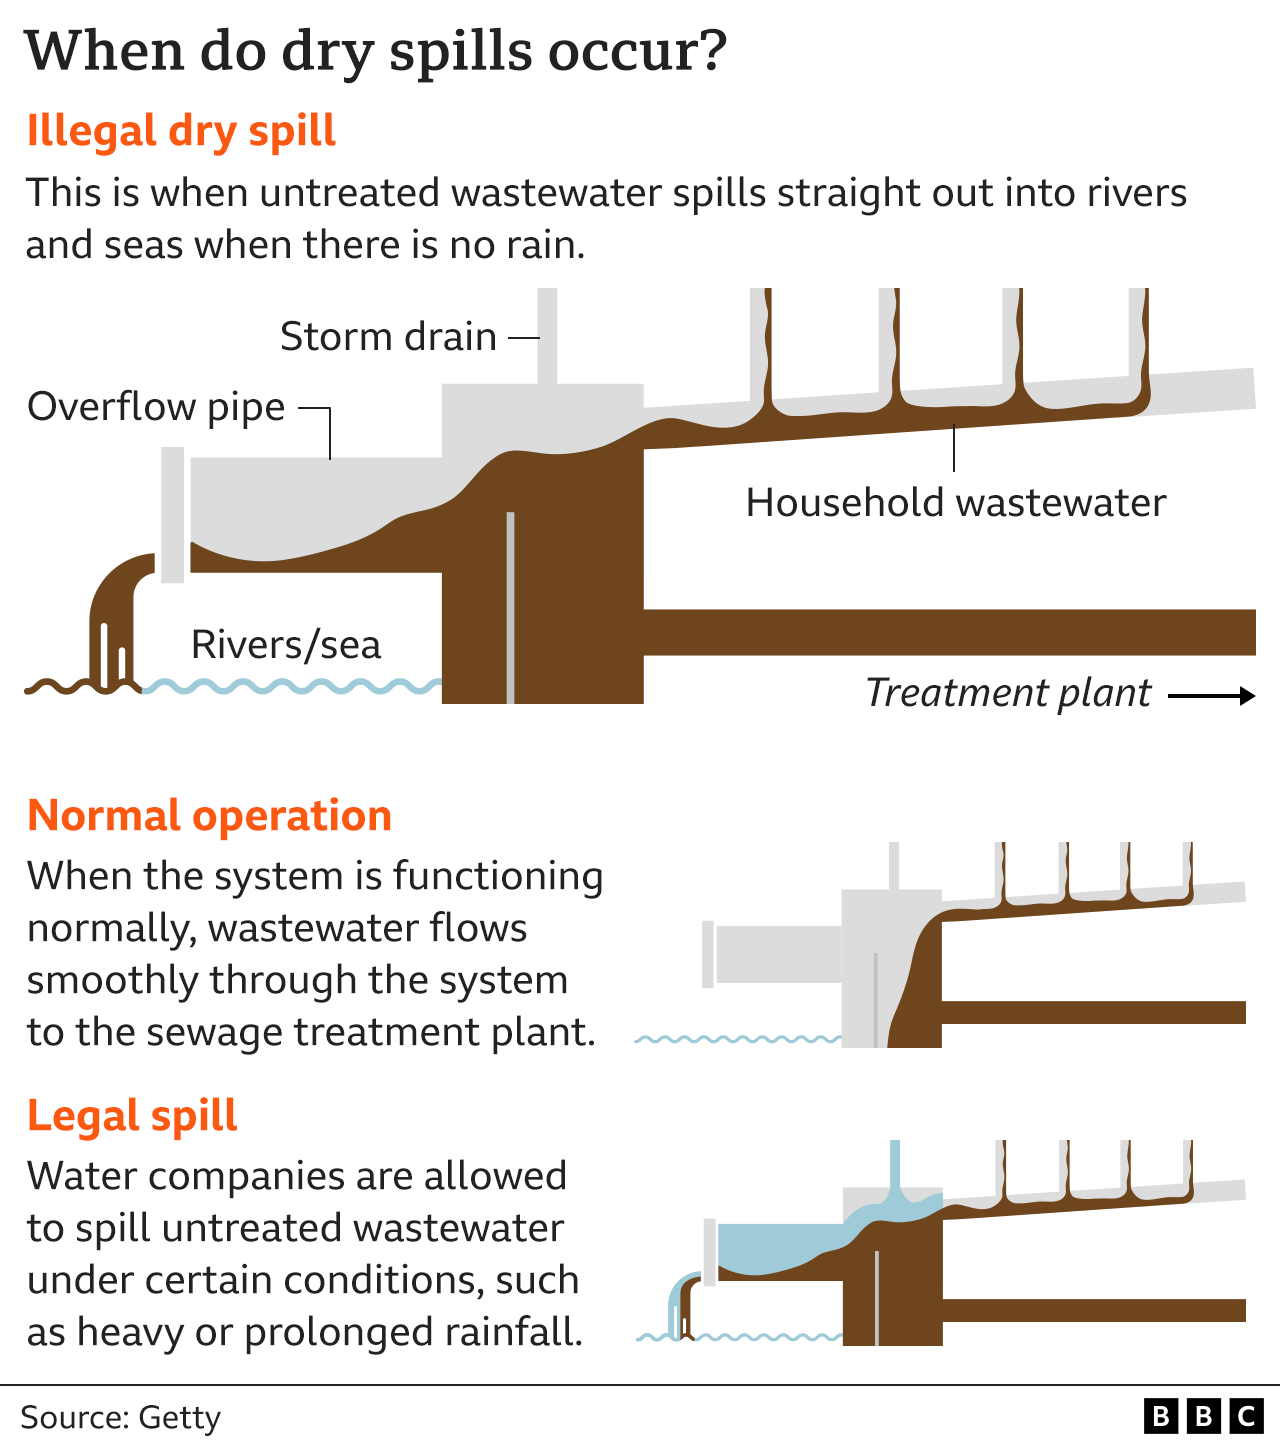 Graphic showing how illegal dry spills occur - in normal conditions, wastewater flows smoothly through the system to the sewage treatment plant. However, sometimes sewage spills straight out into rivers and seas even when there is no rain.